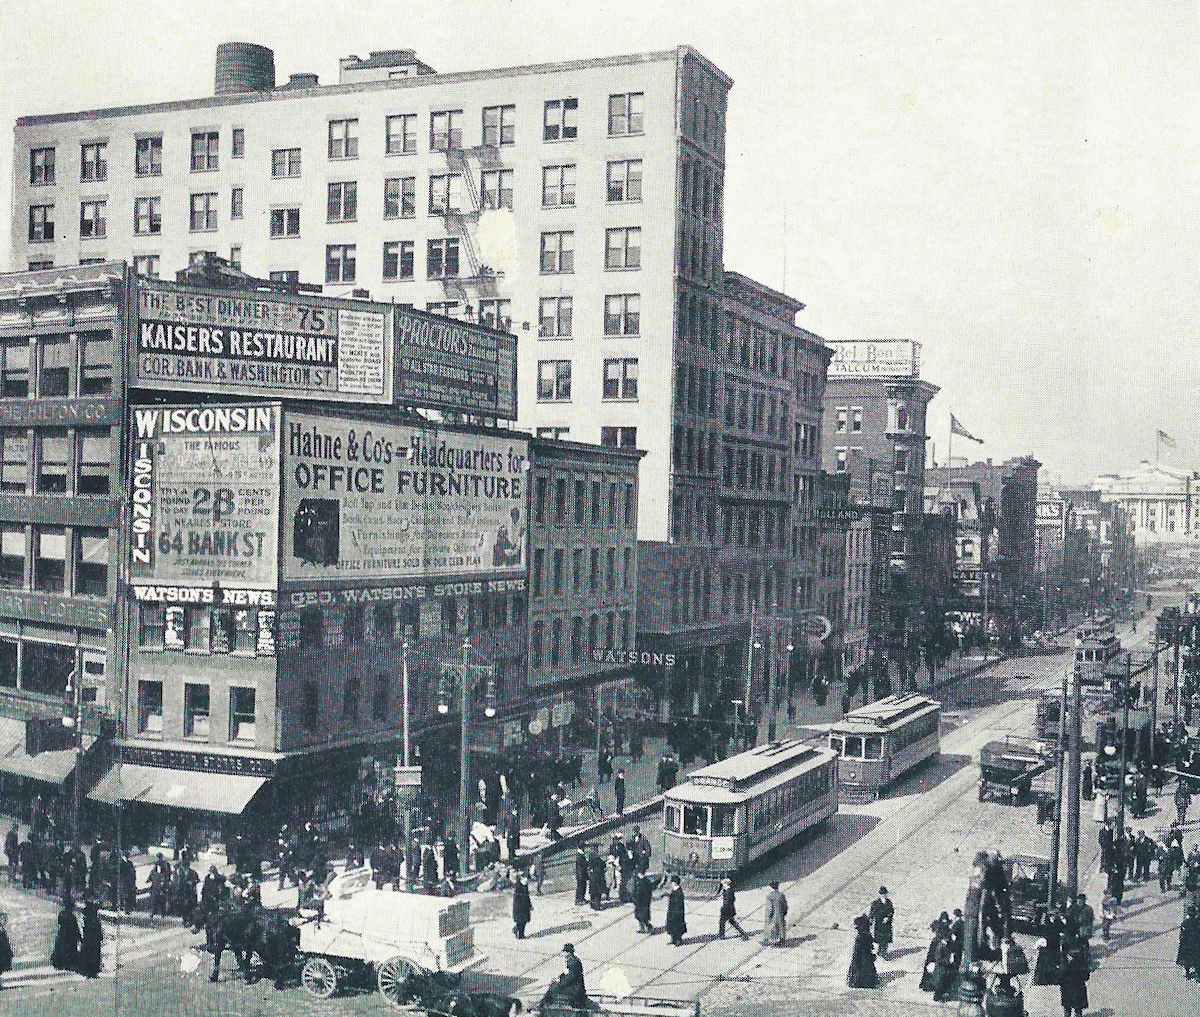 Market Street looking west from Broad Street
From "Newark, the City of Industry" Published by the Newark Board of Trade 1912
